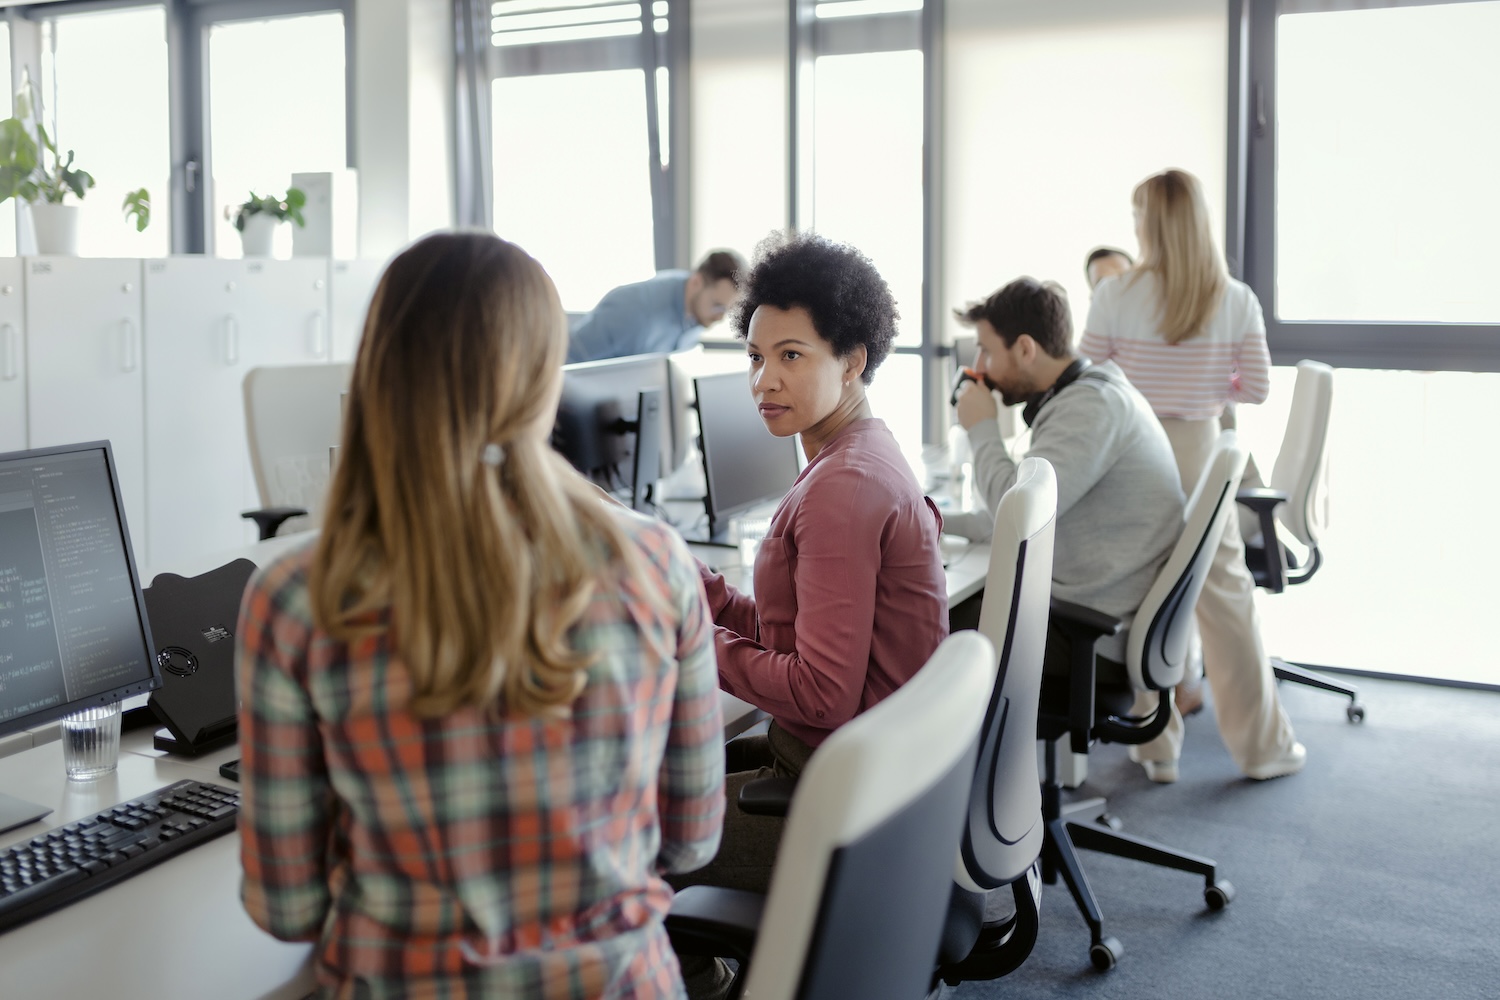 Several office employees holding a conversation in front of their computers